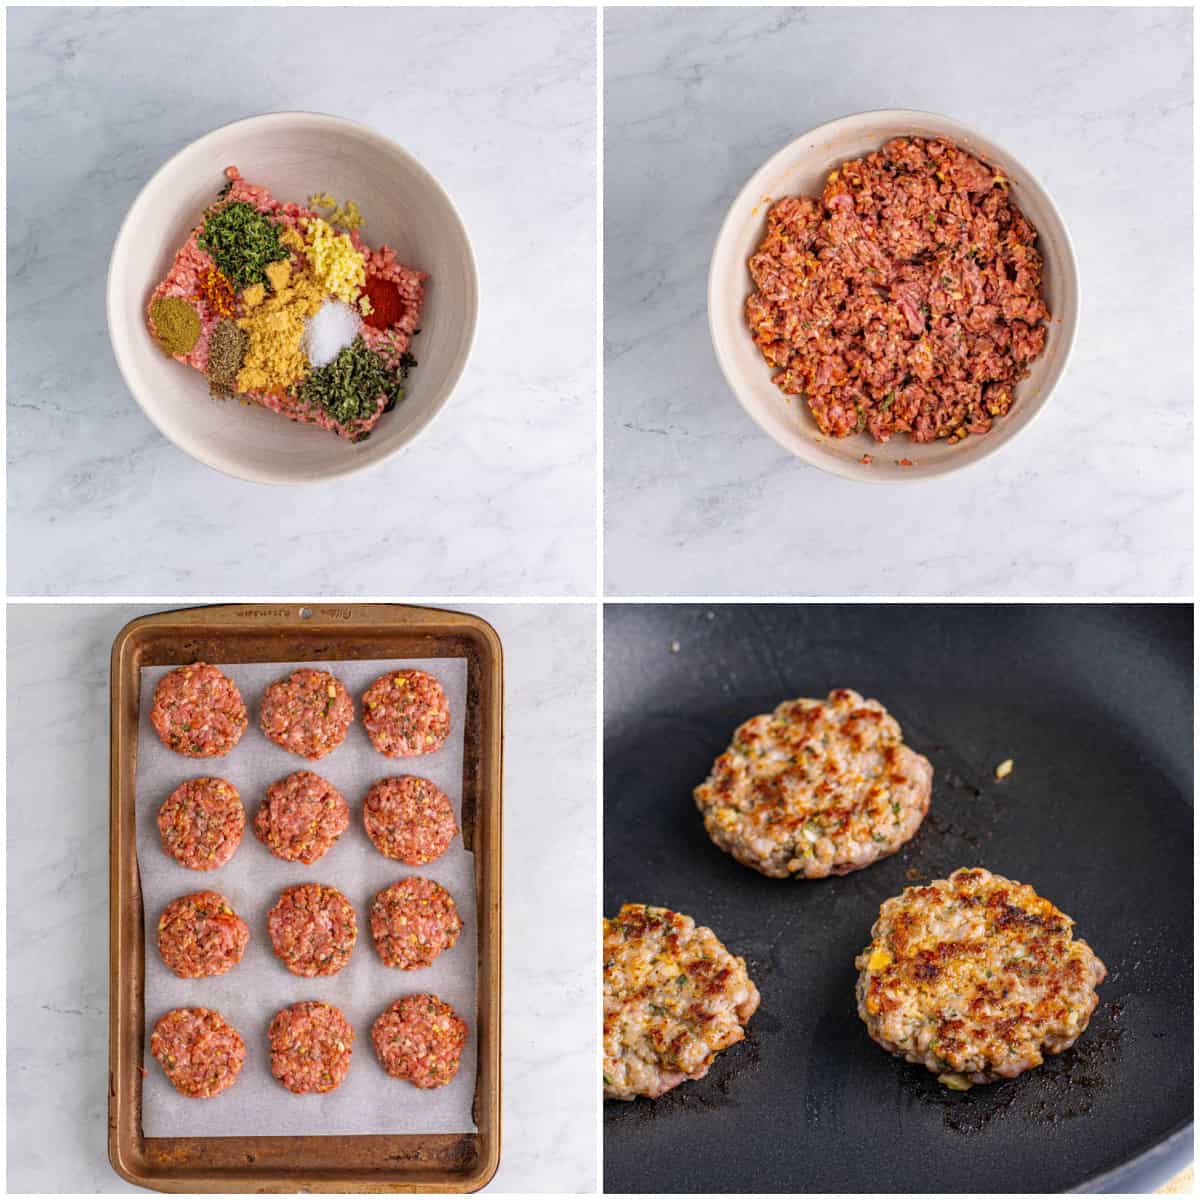 Step by step photos on how to make a Breakfast Sausage Recipe.